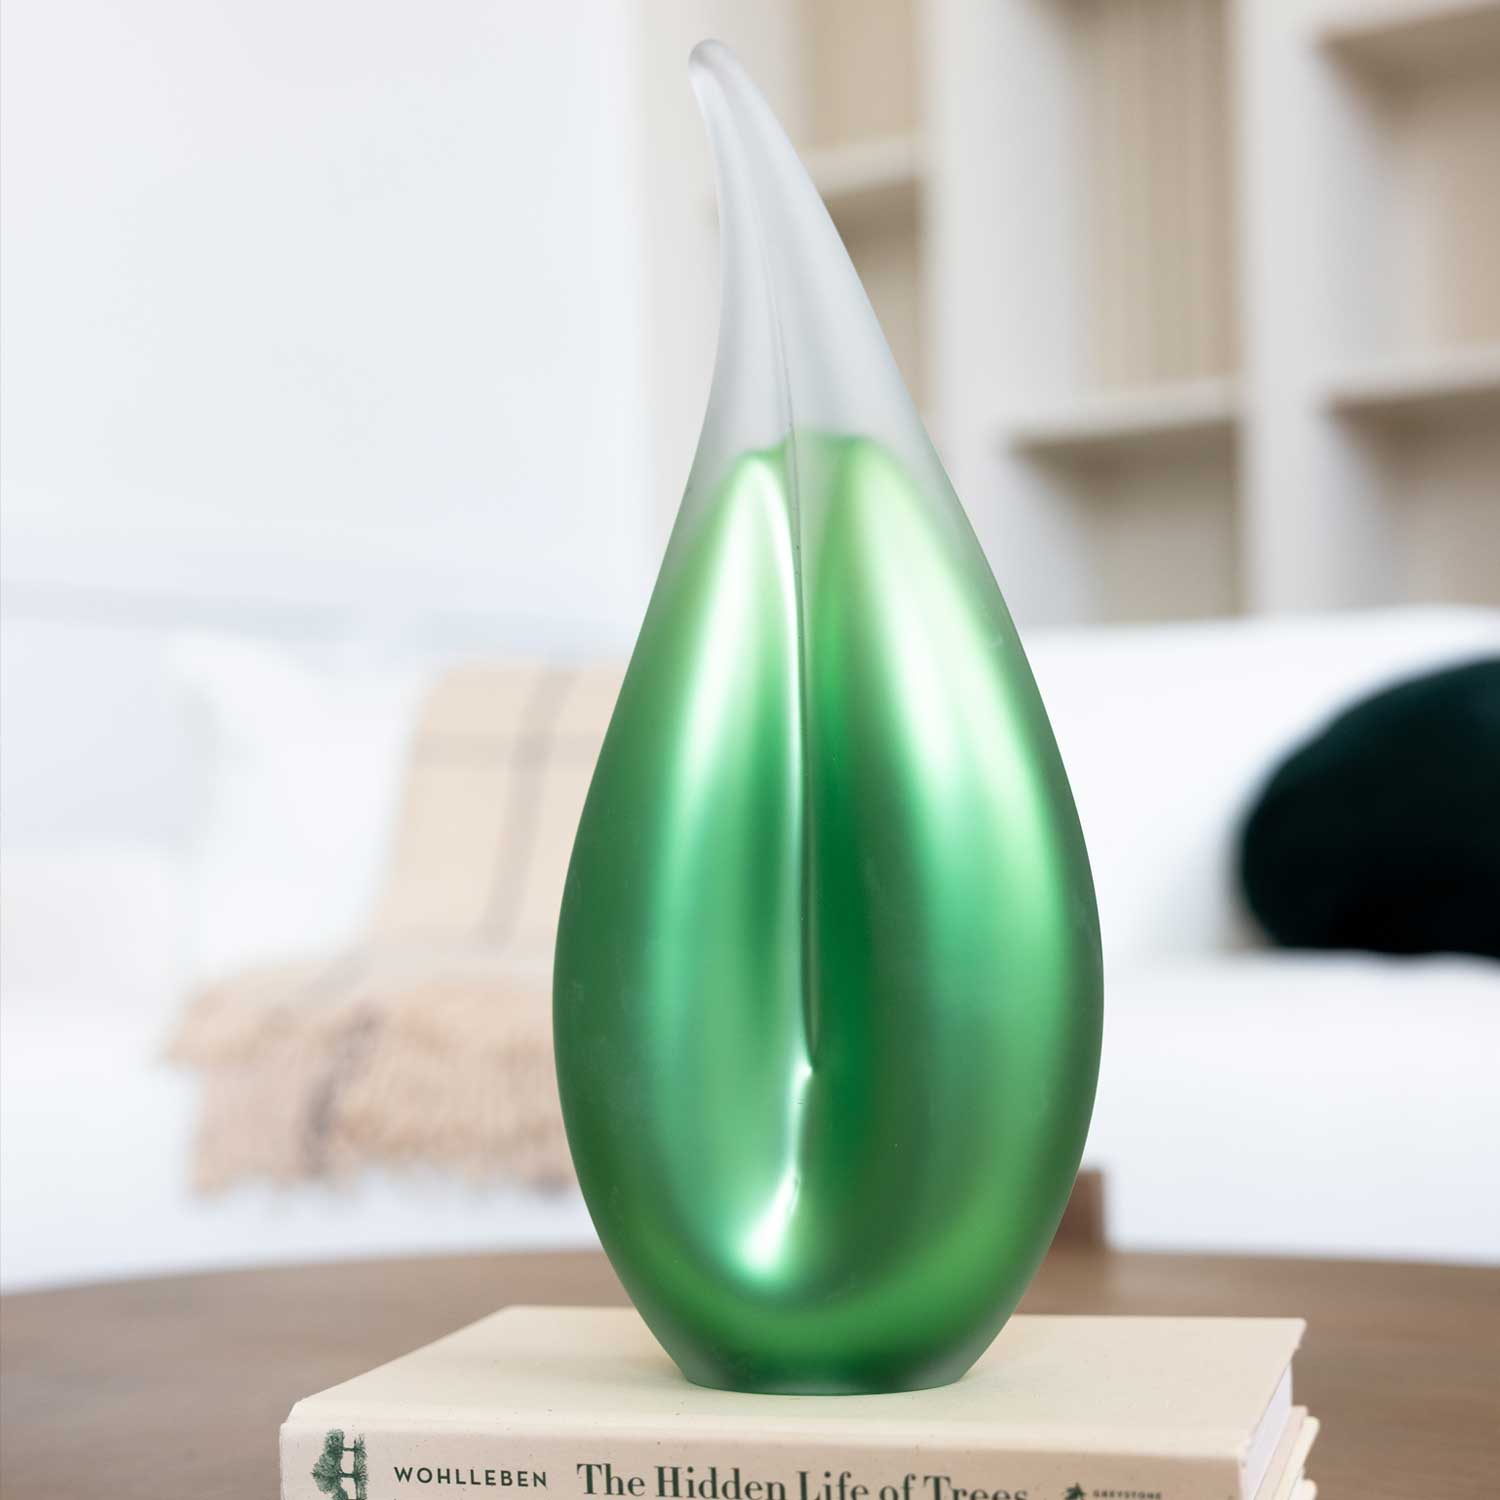 Soffi Studio: Small Green Pearl Flame Product Image 1 of 2